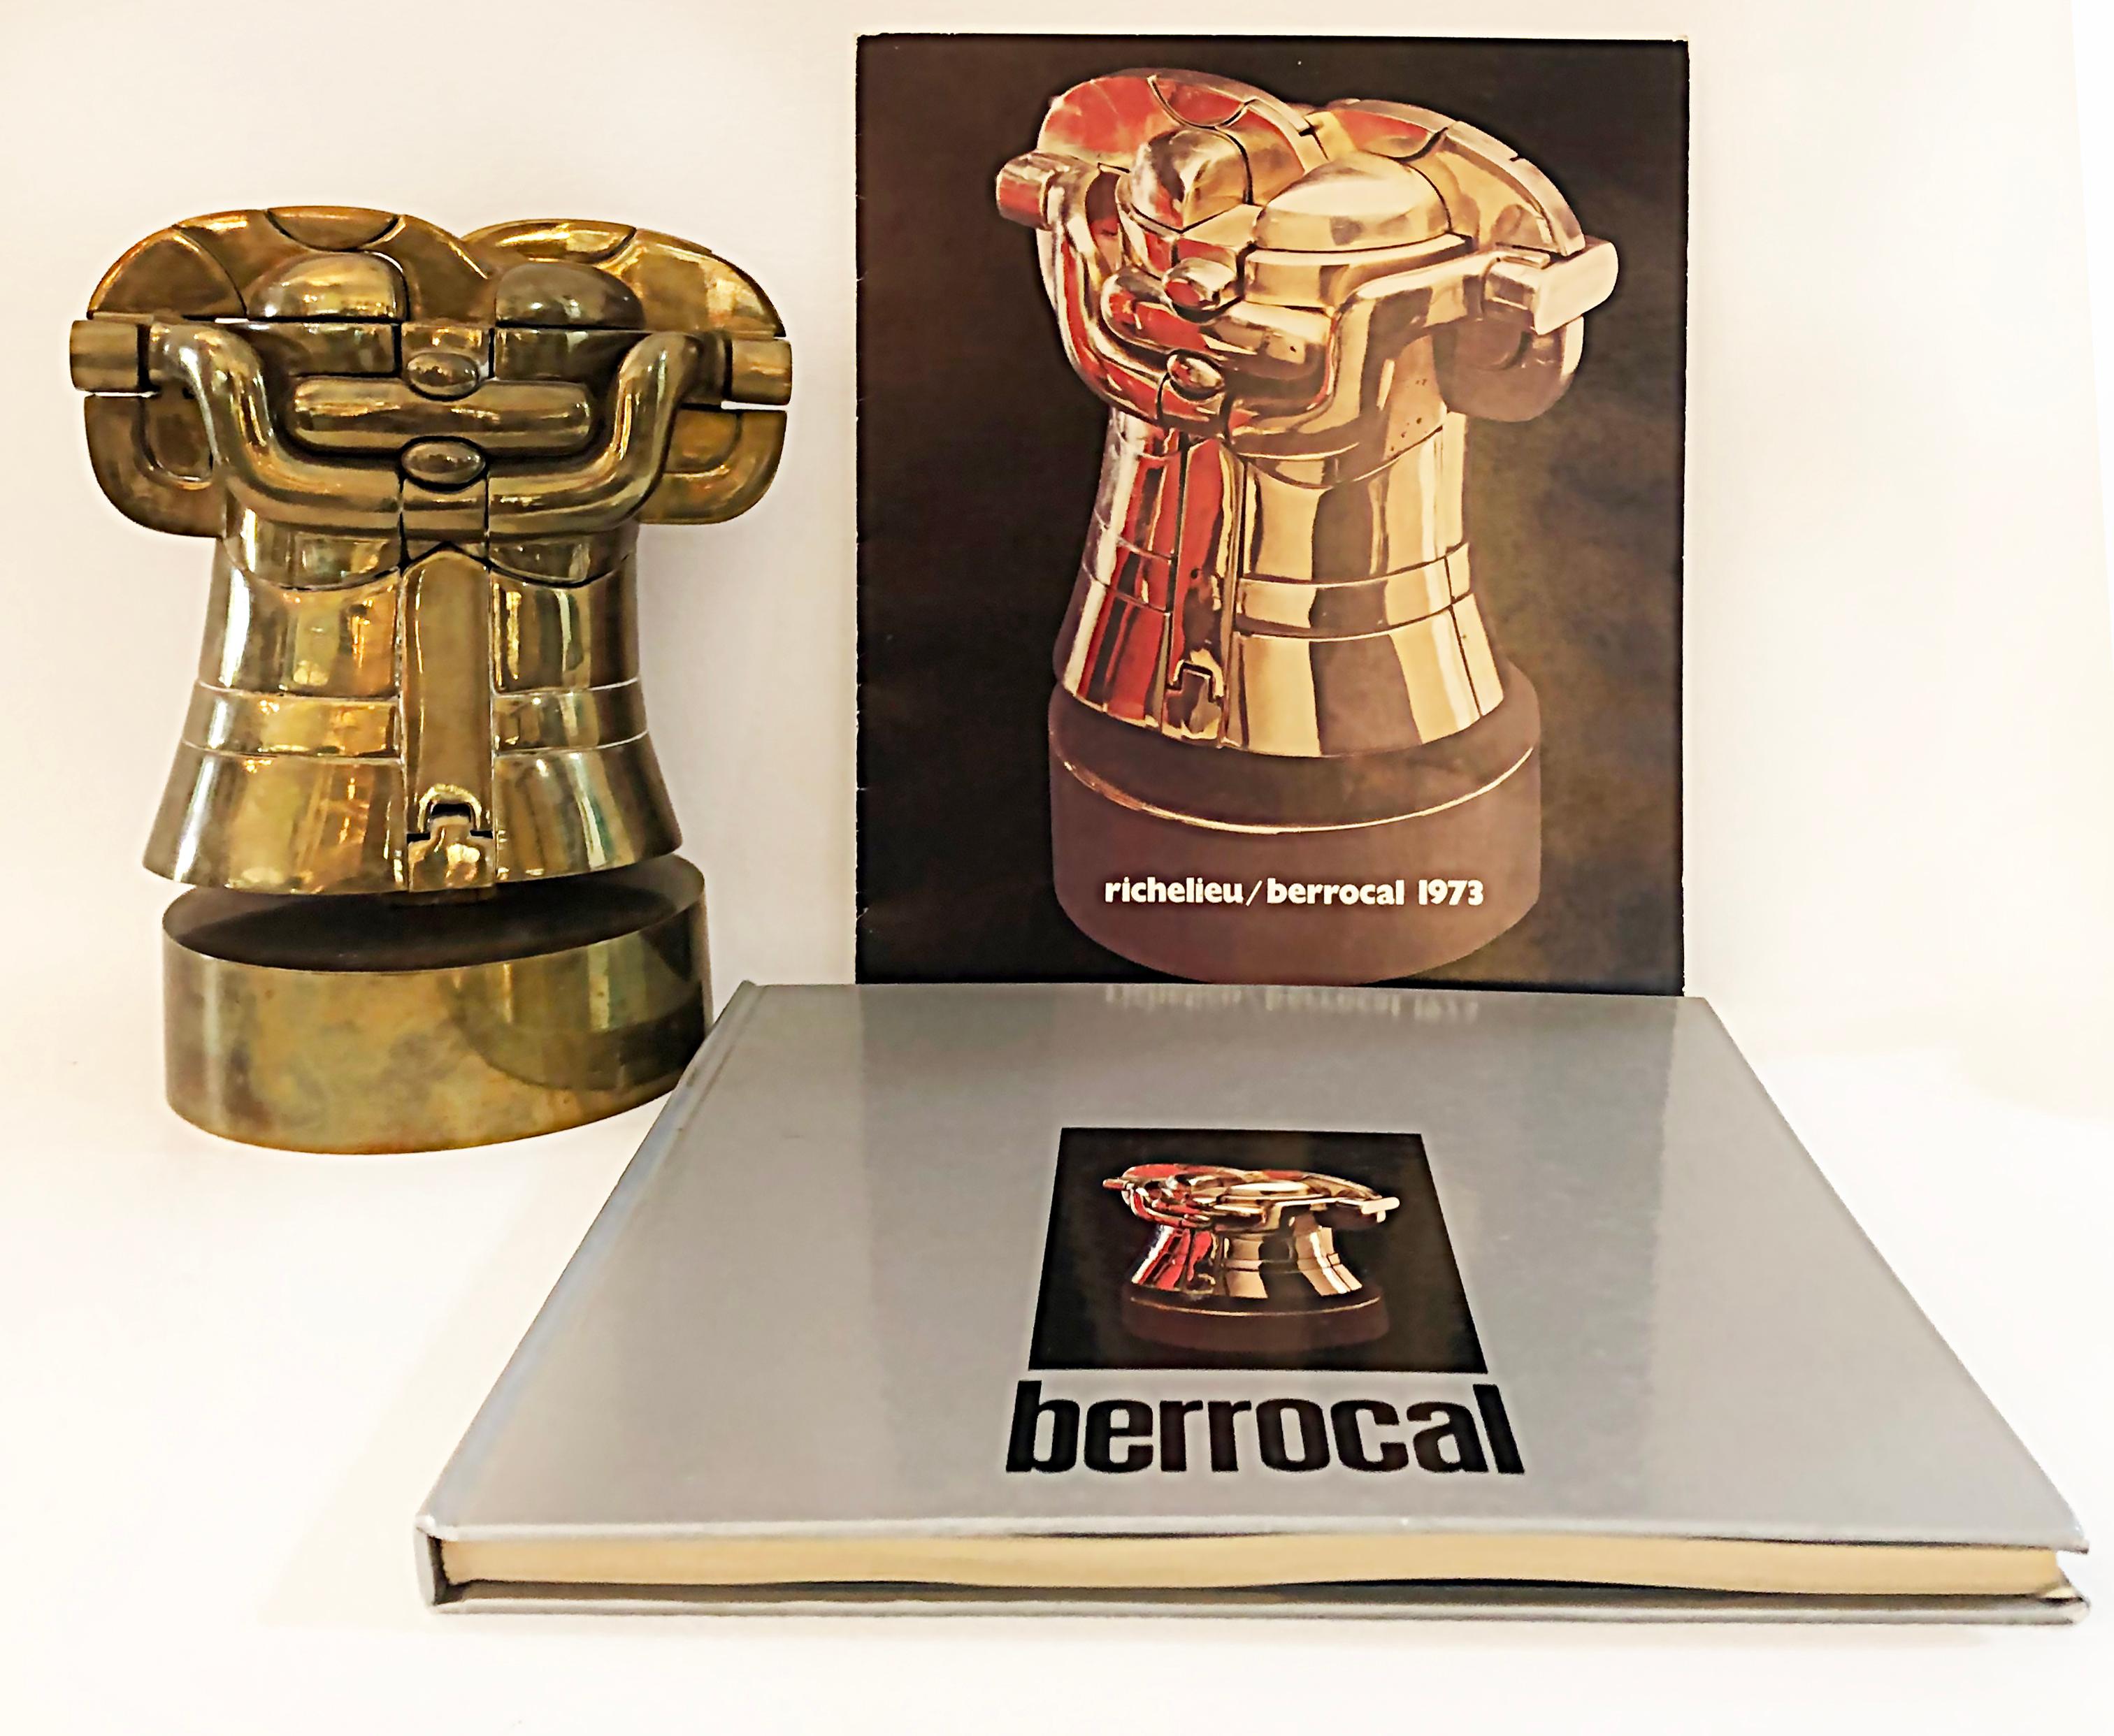 Miguel Ortiz berrocal large Richelieu bronze puzzle sculpture.

Offered for sale is a rare bronze puzzle sculpture by Spanish artist Miguel Ortiz Berrocal (1933-2006) signed and numbered in a limited edition and made in Italy. The sculpture is